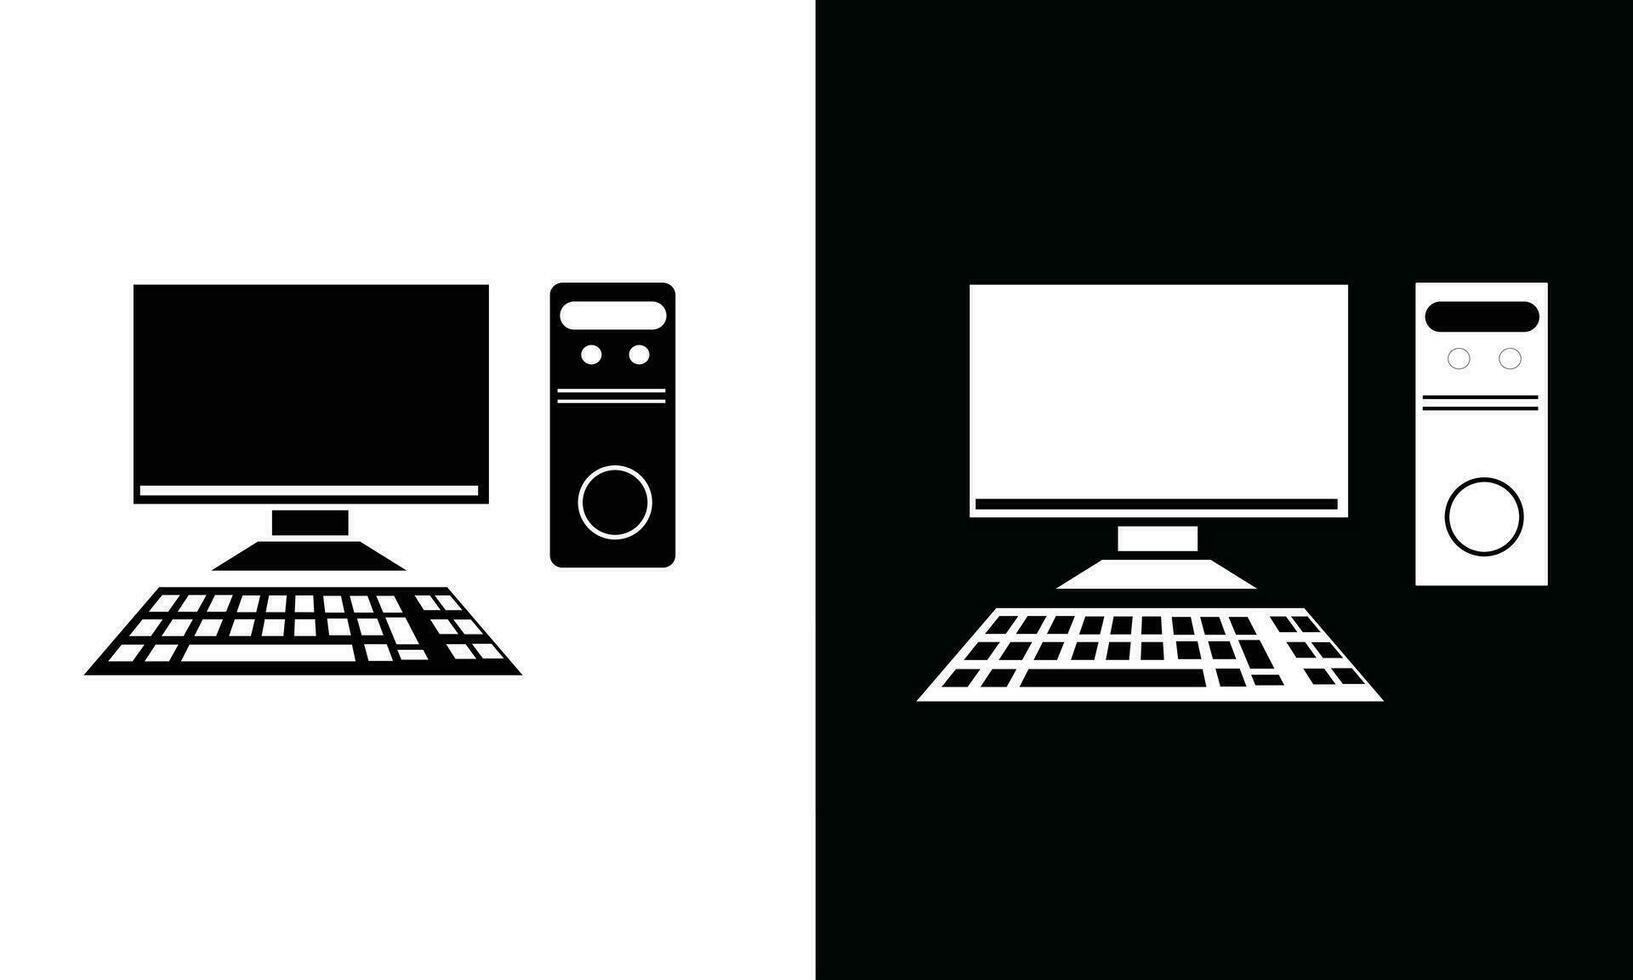 Computer icon vector. Computer silhouette. School supplies icon vector. Back to school concept. Learning and education icon. Flat vector in black and white.